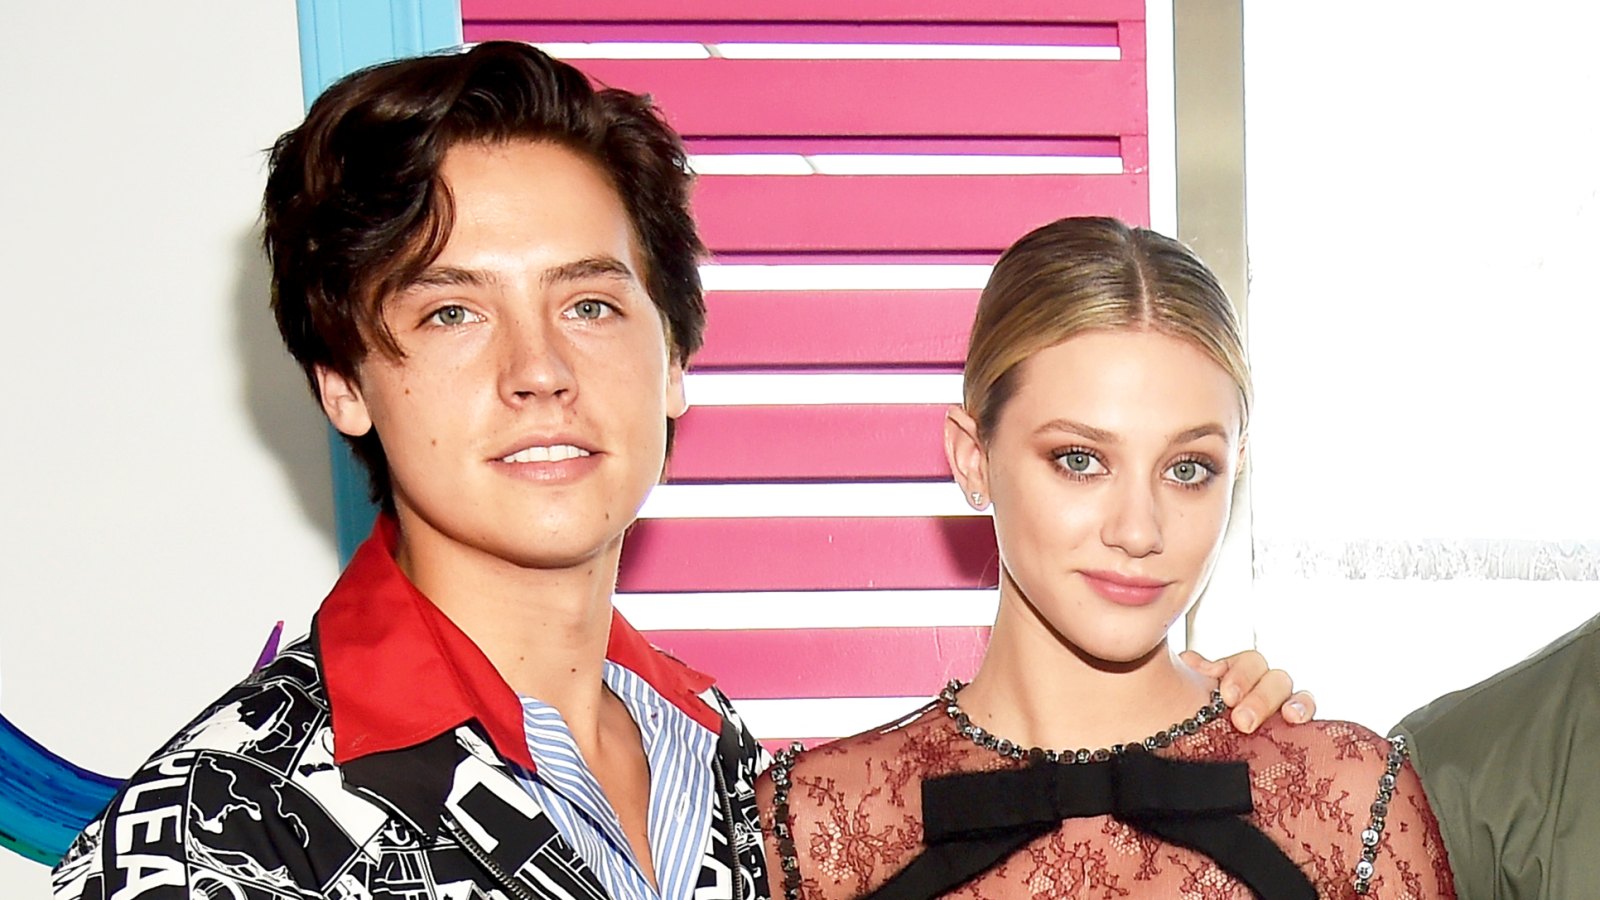 Cole Sprouse and Lili Reinhart attend the Teen Choice Awards 2017 at Galen Center in Los Angeles, California.